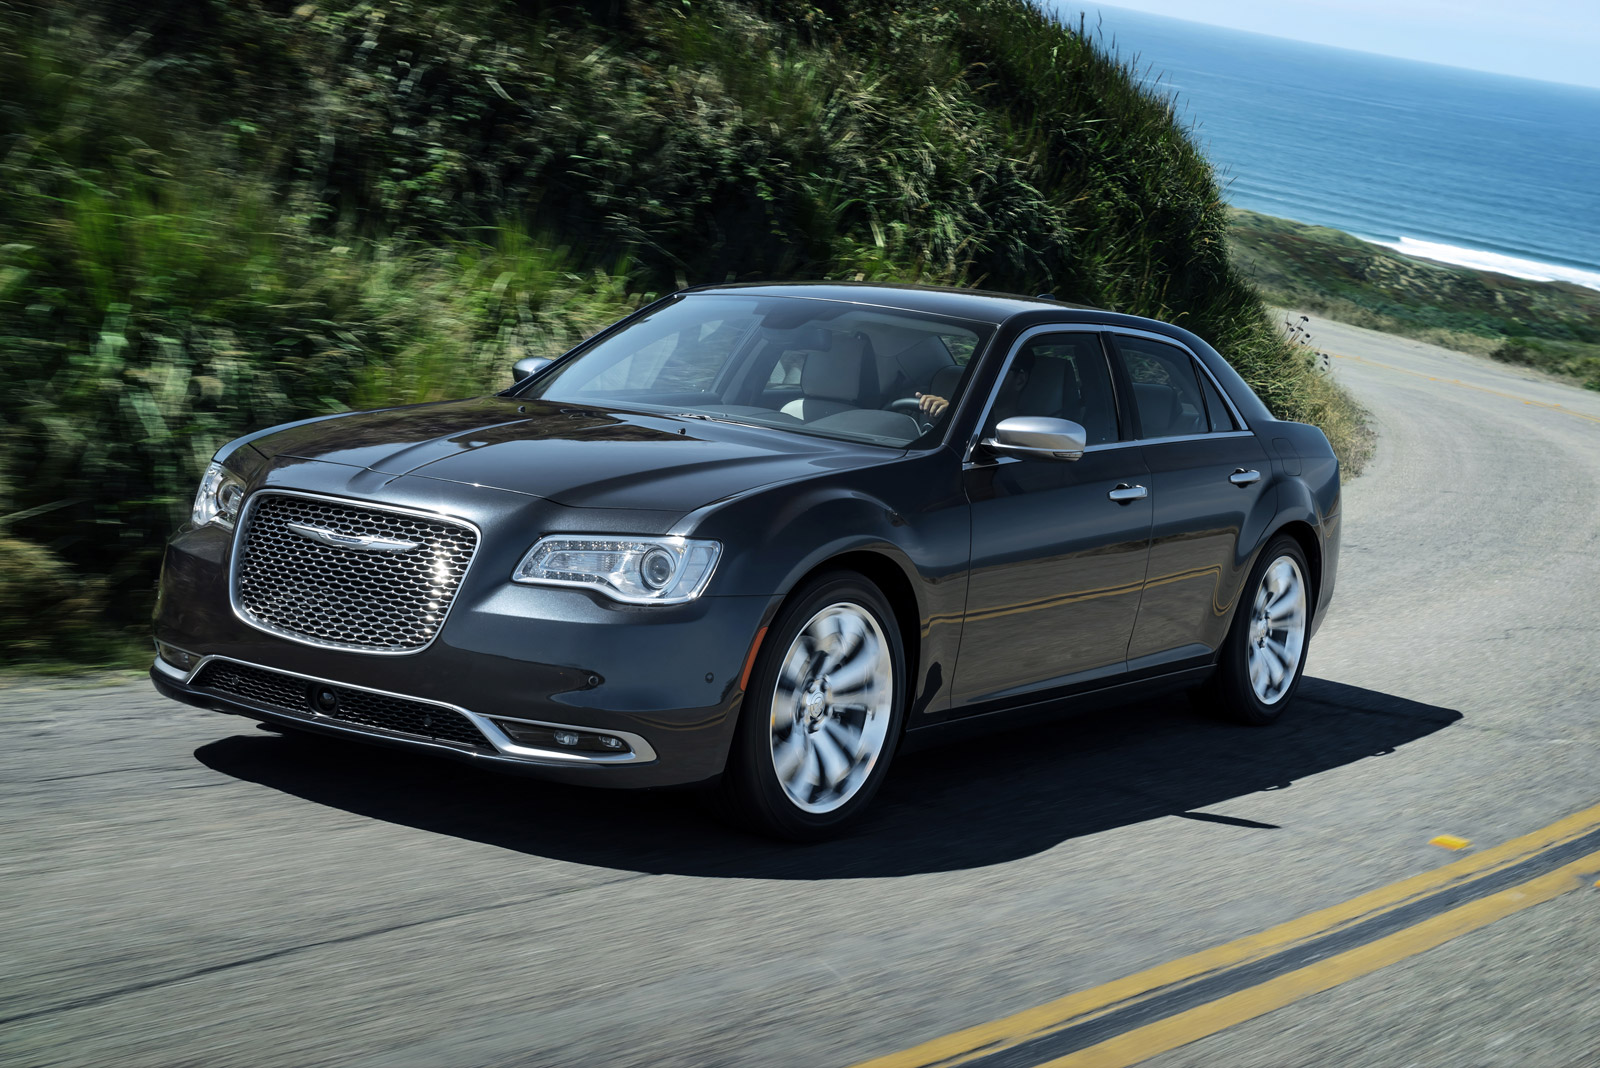 2015 Chrysler 300 Review Ratings Specs Prices And Photos The Car